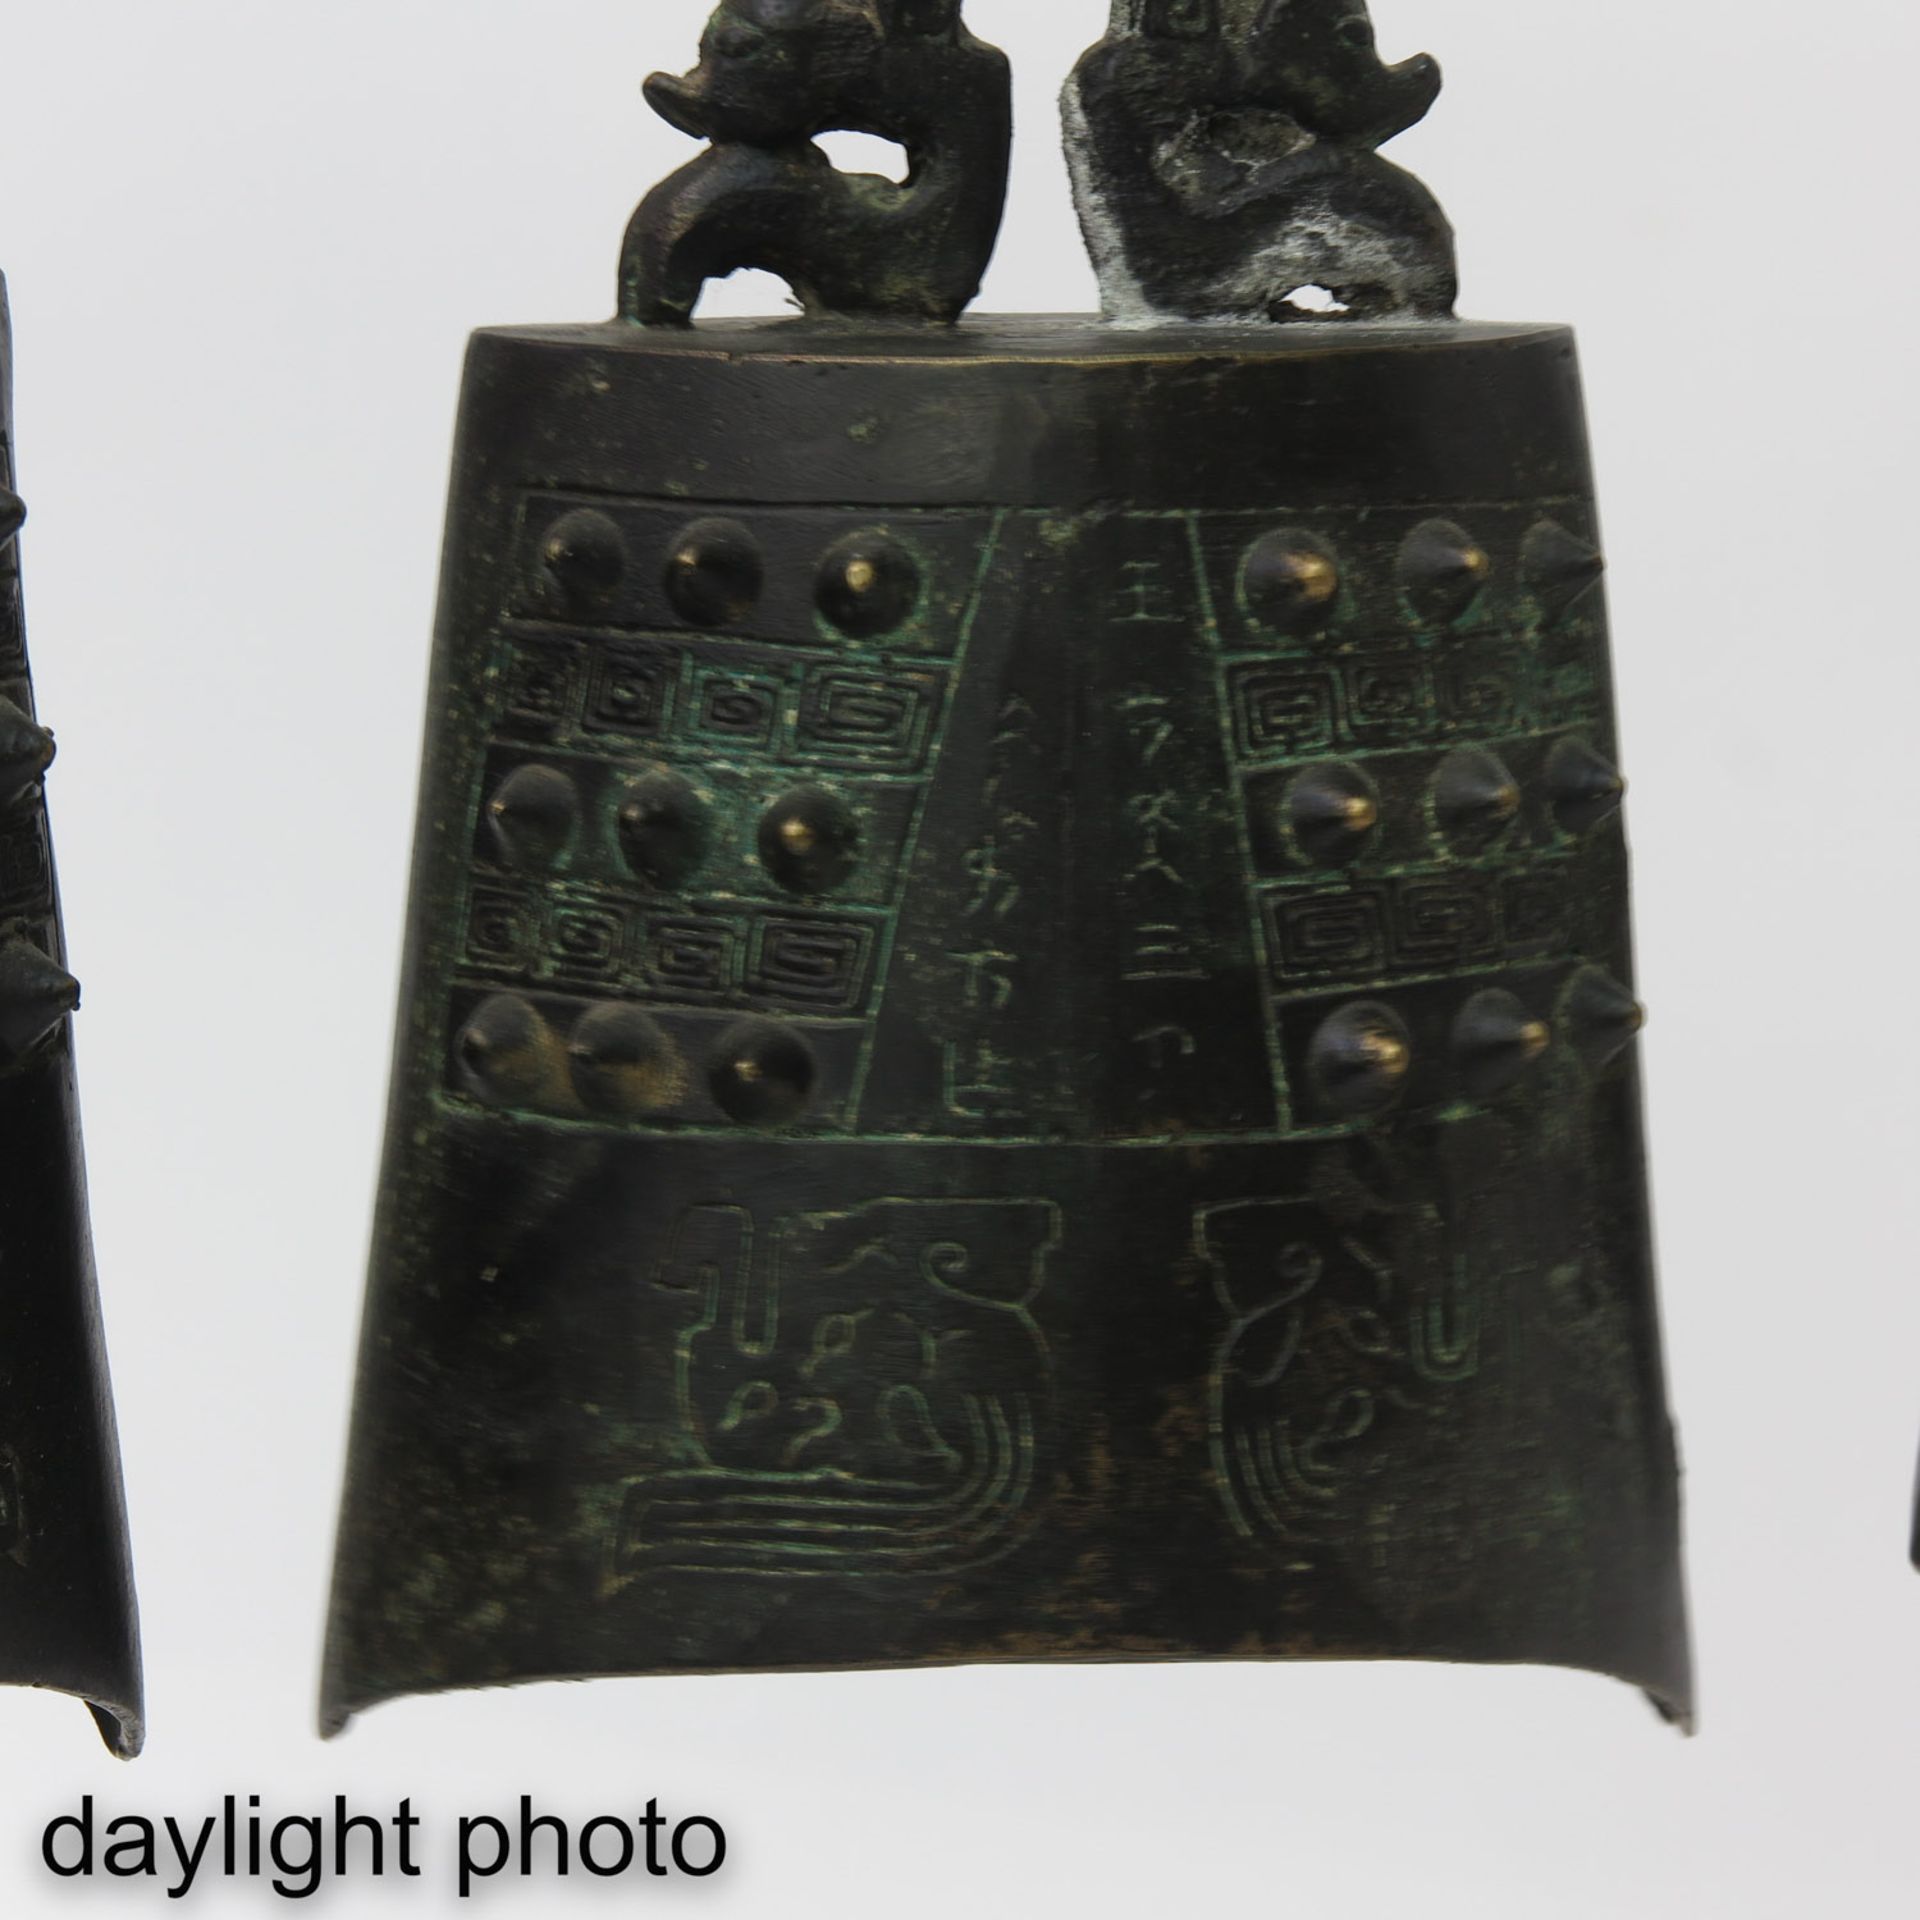 A Chinese Standing Rack with Bells and Mallet - Image 8 of 8